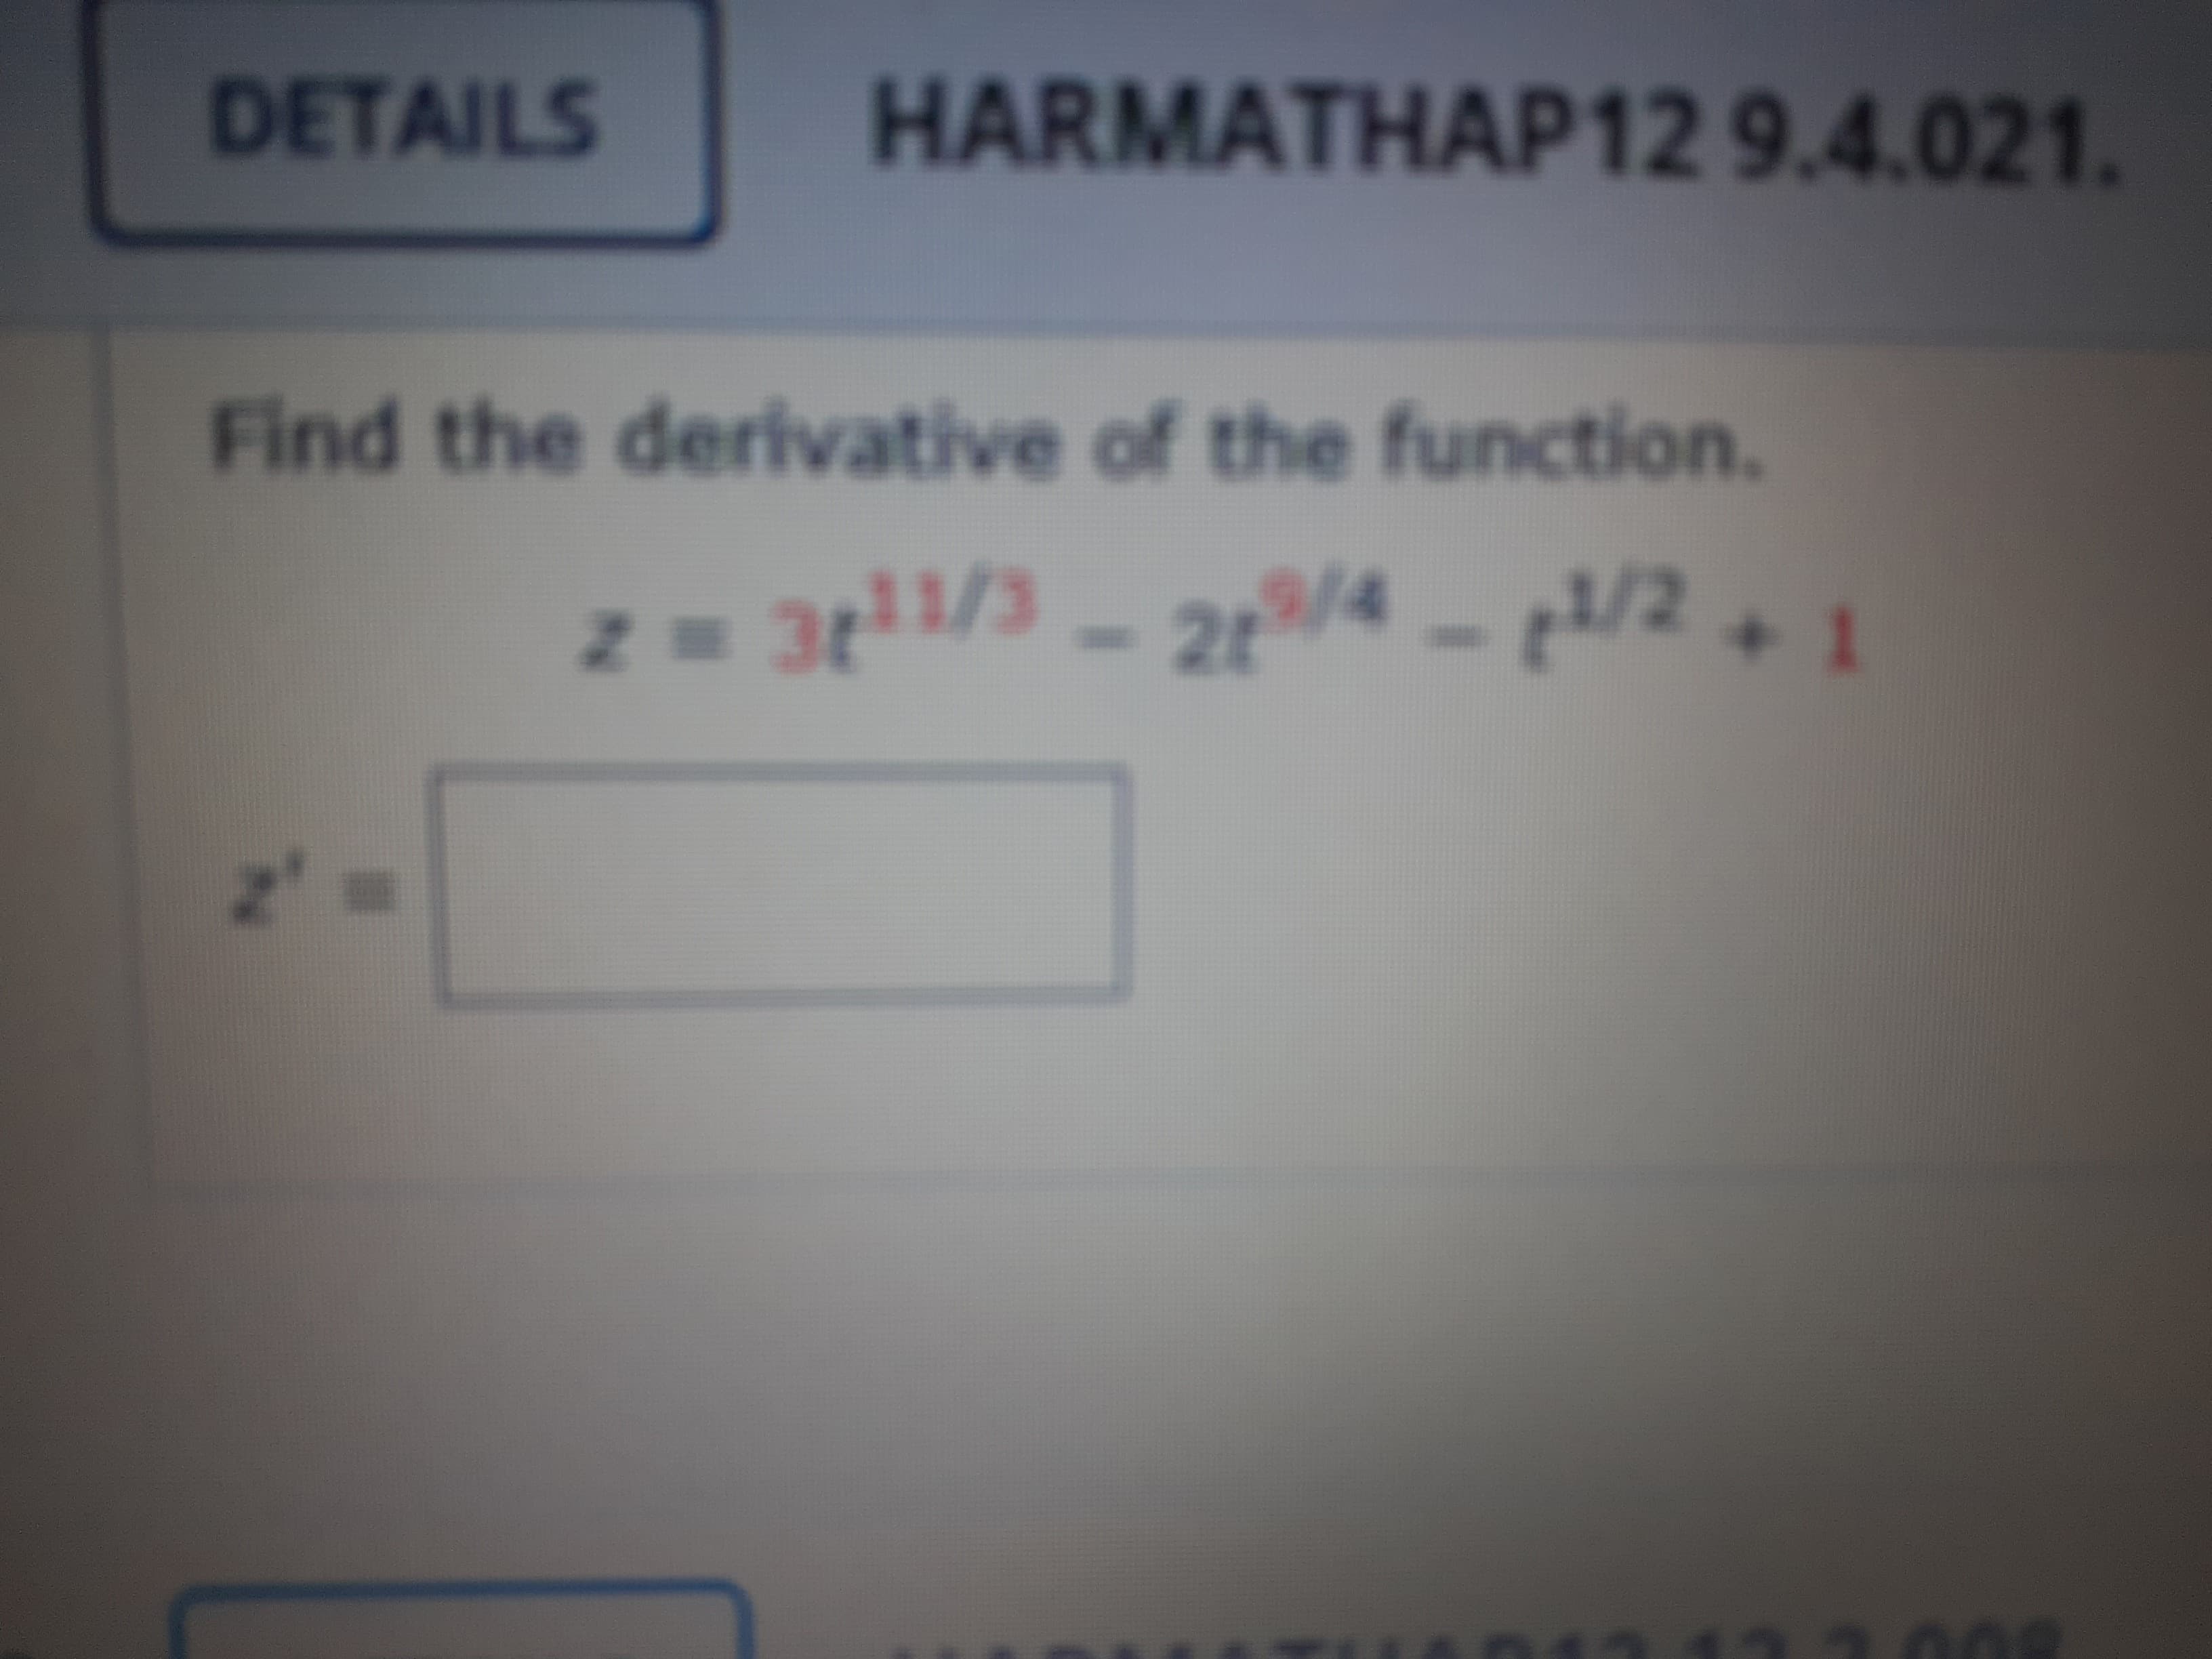 Find the derivative of the function.
21/4
1/2
+1
